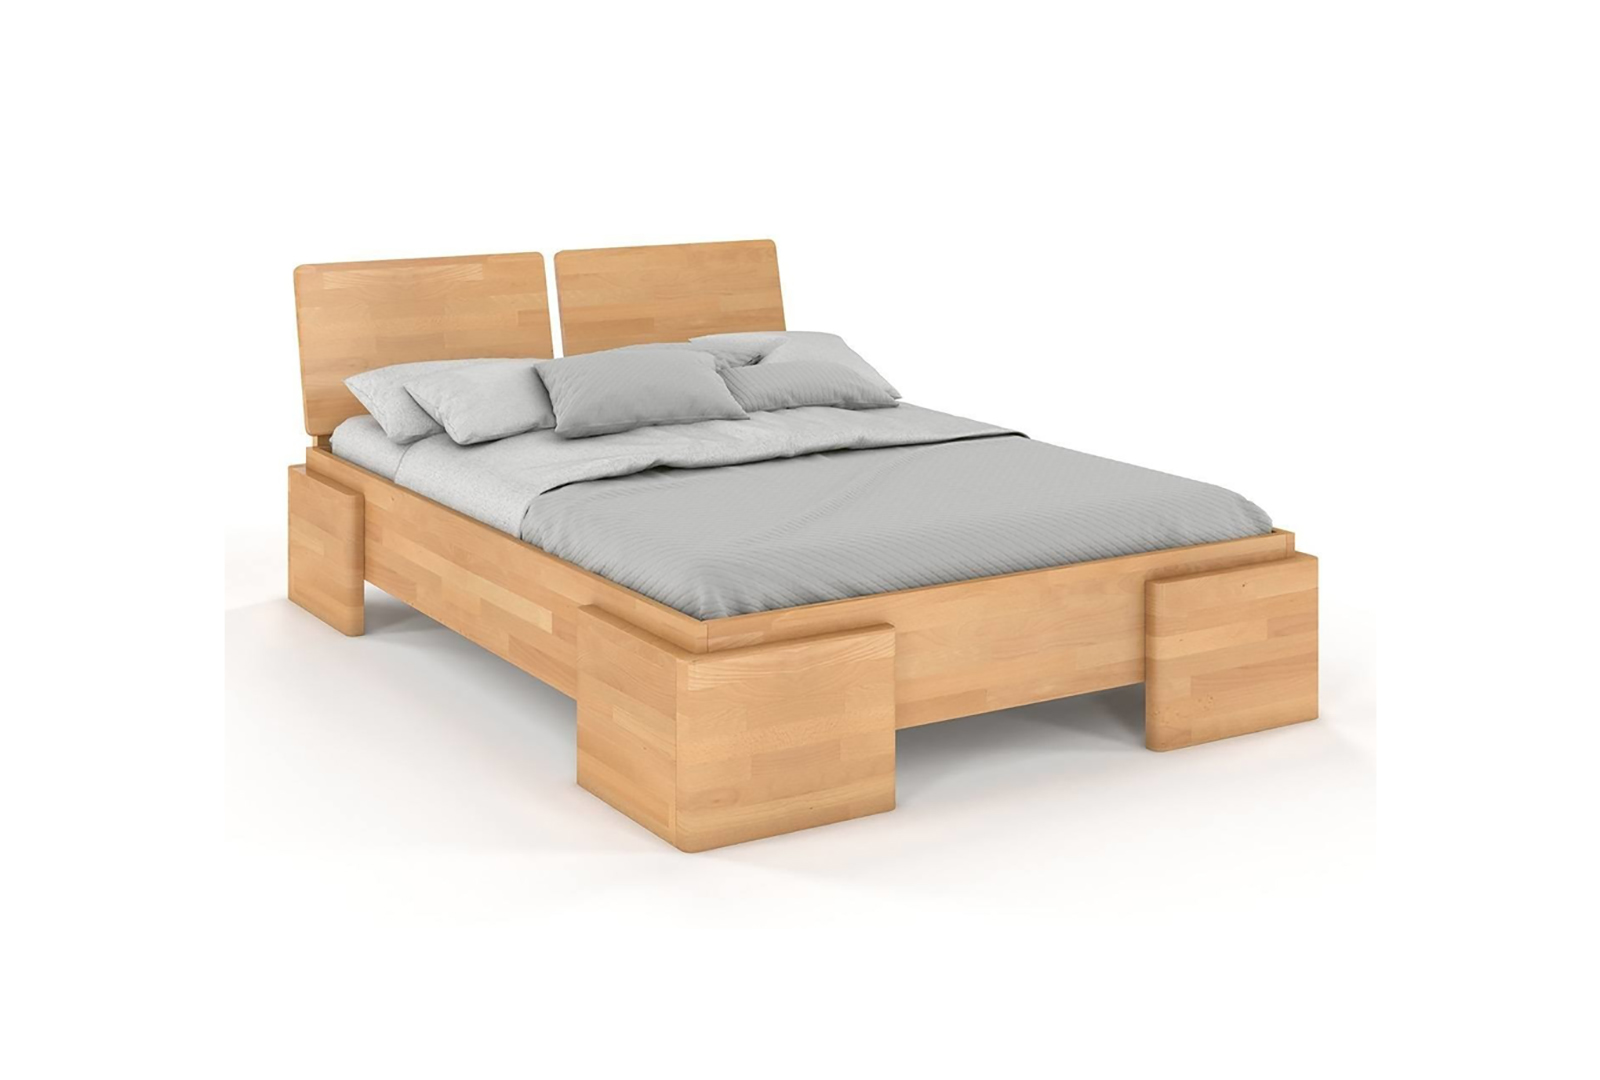 VISBY ARGENTO HIGH BEECH BED